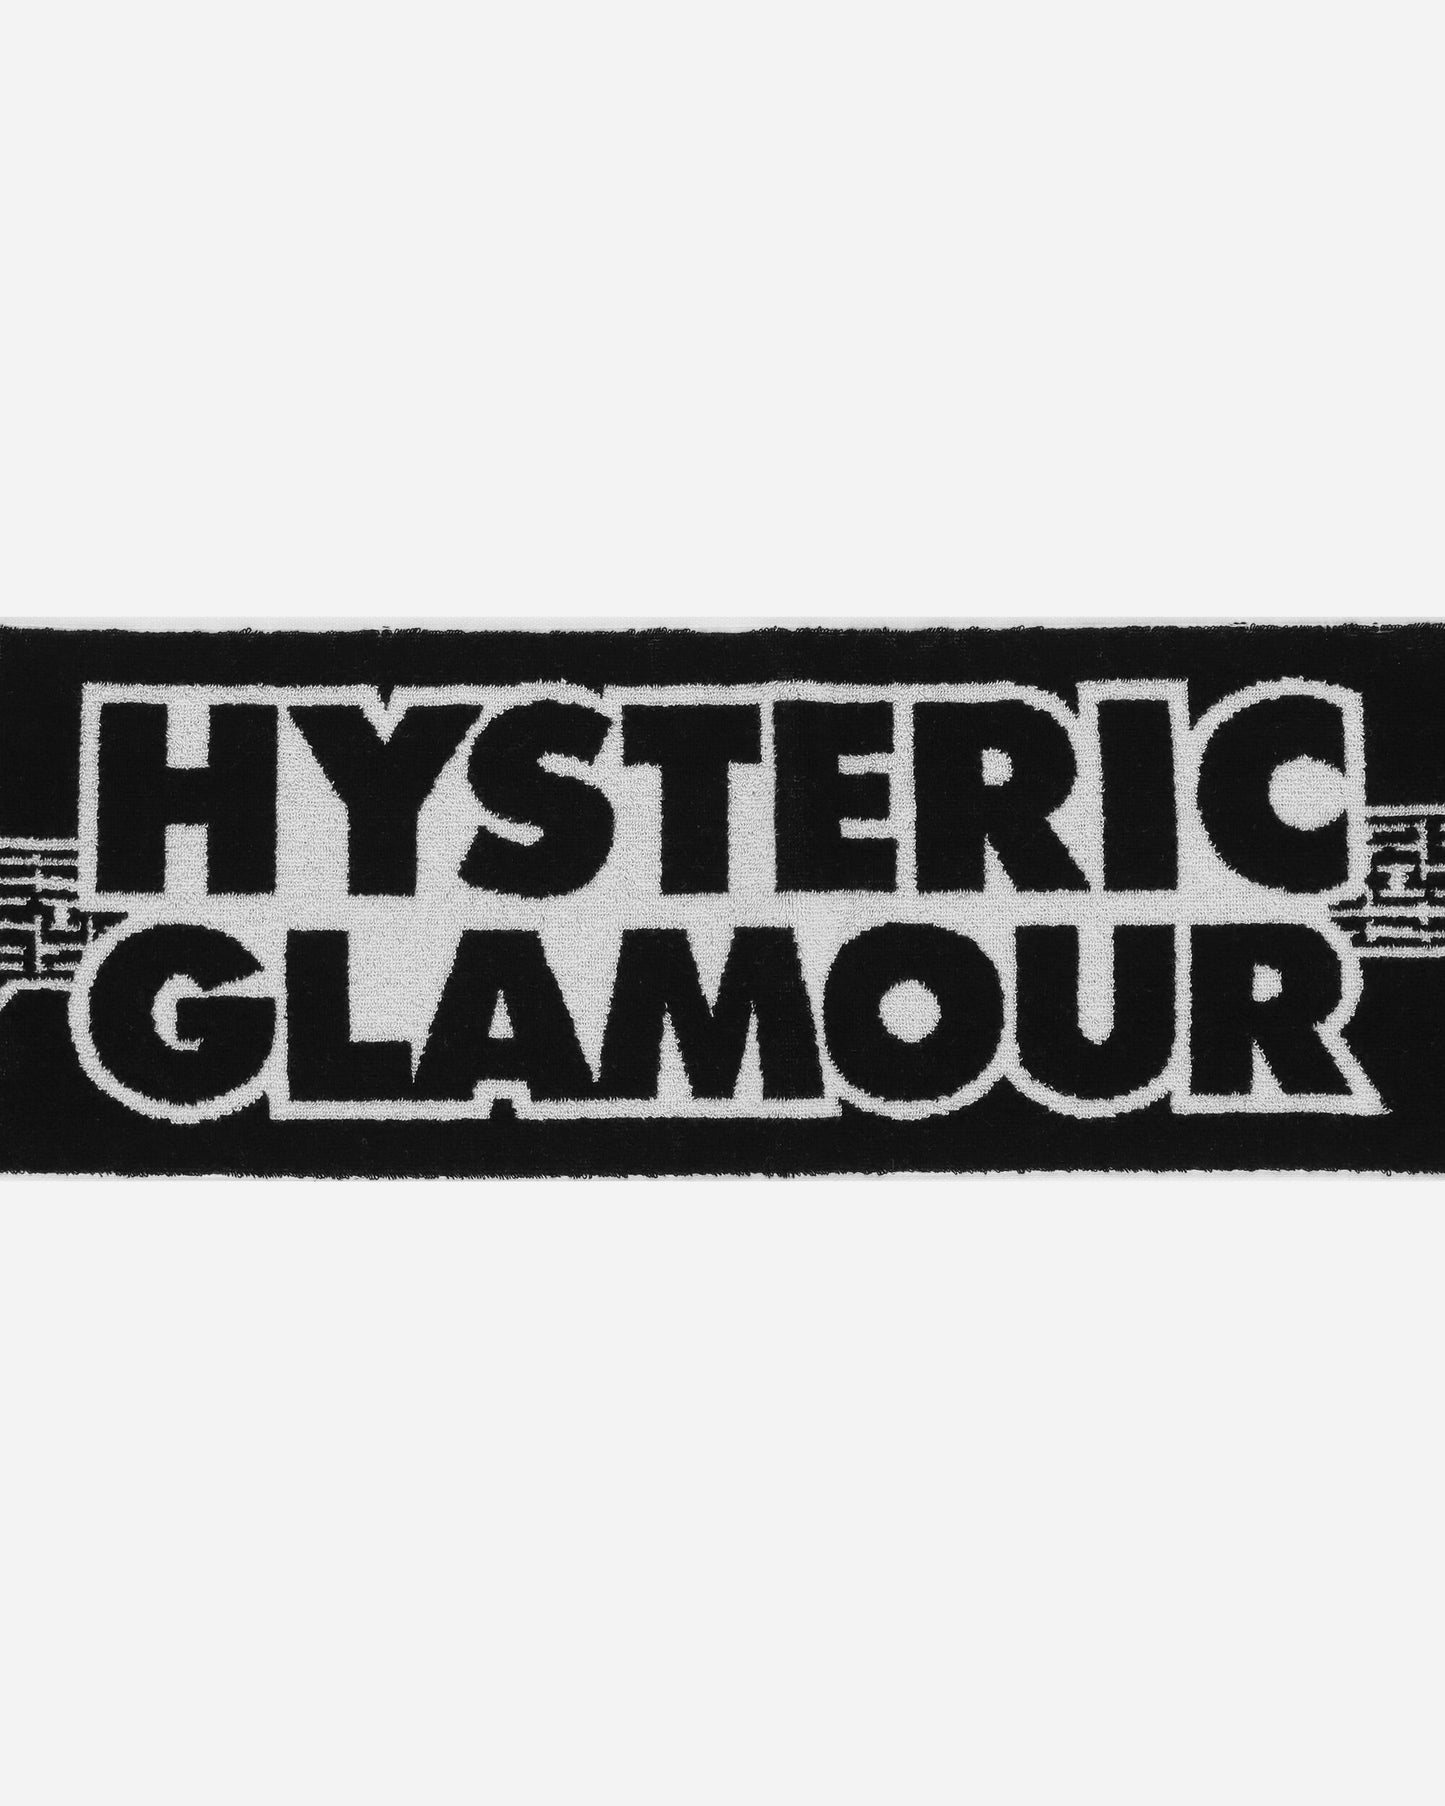 Hysteric Glamour Guitar Girl Black Gloves and Scarves Scarves and Warmneck 02241QC029 B